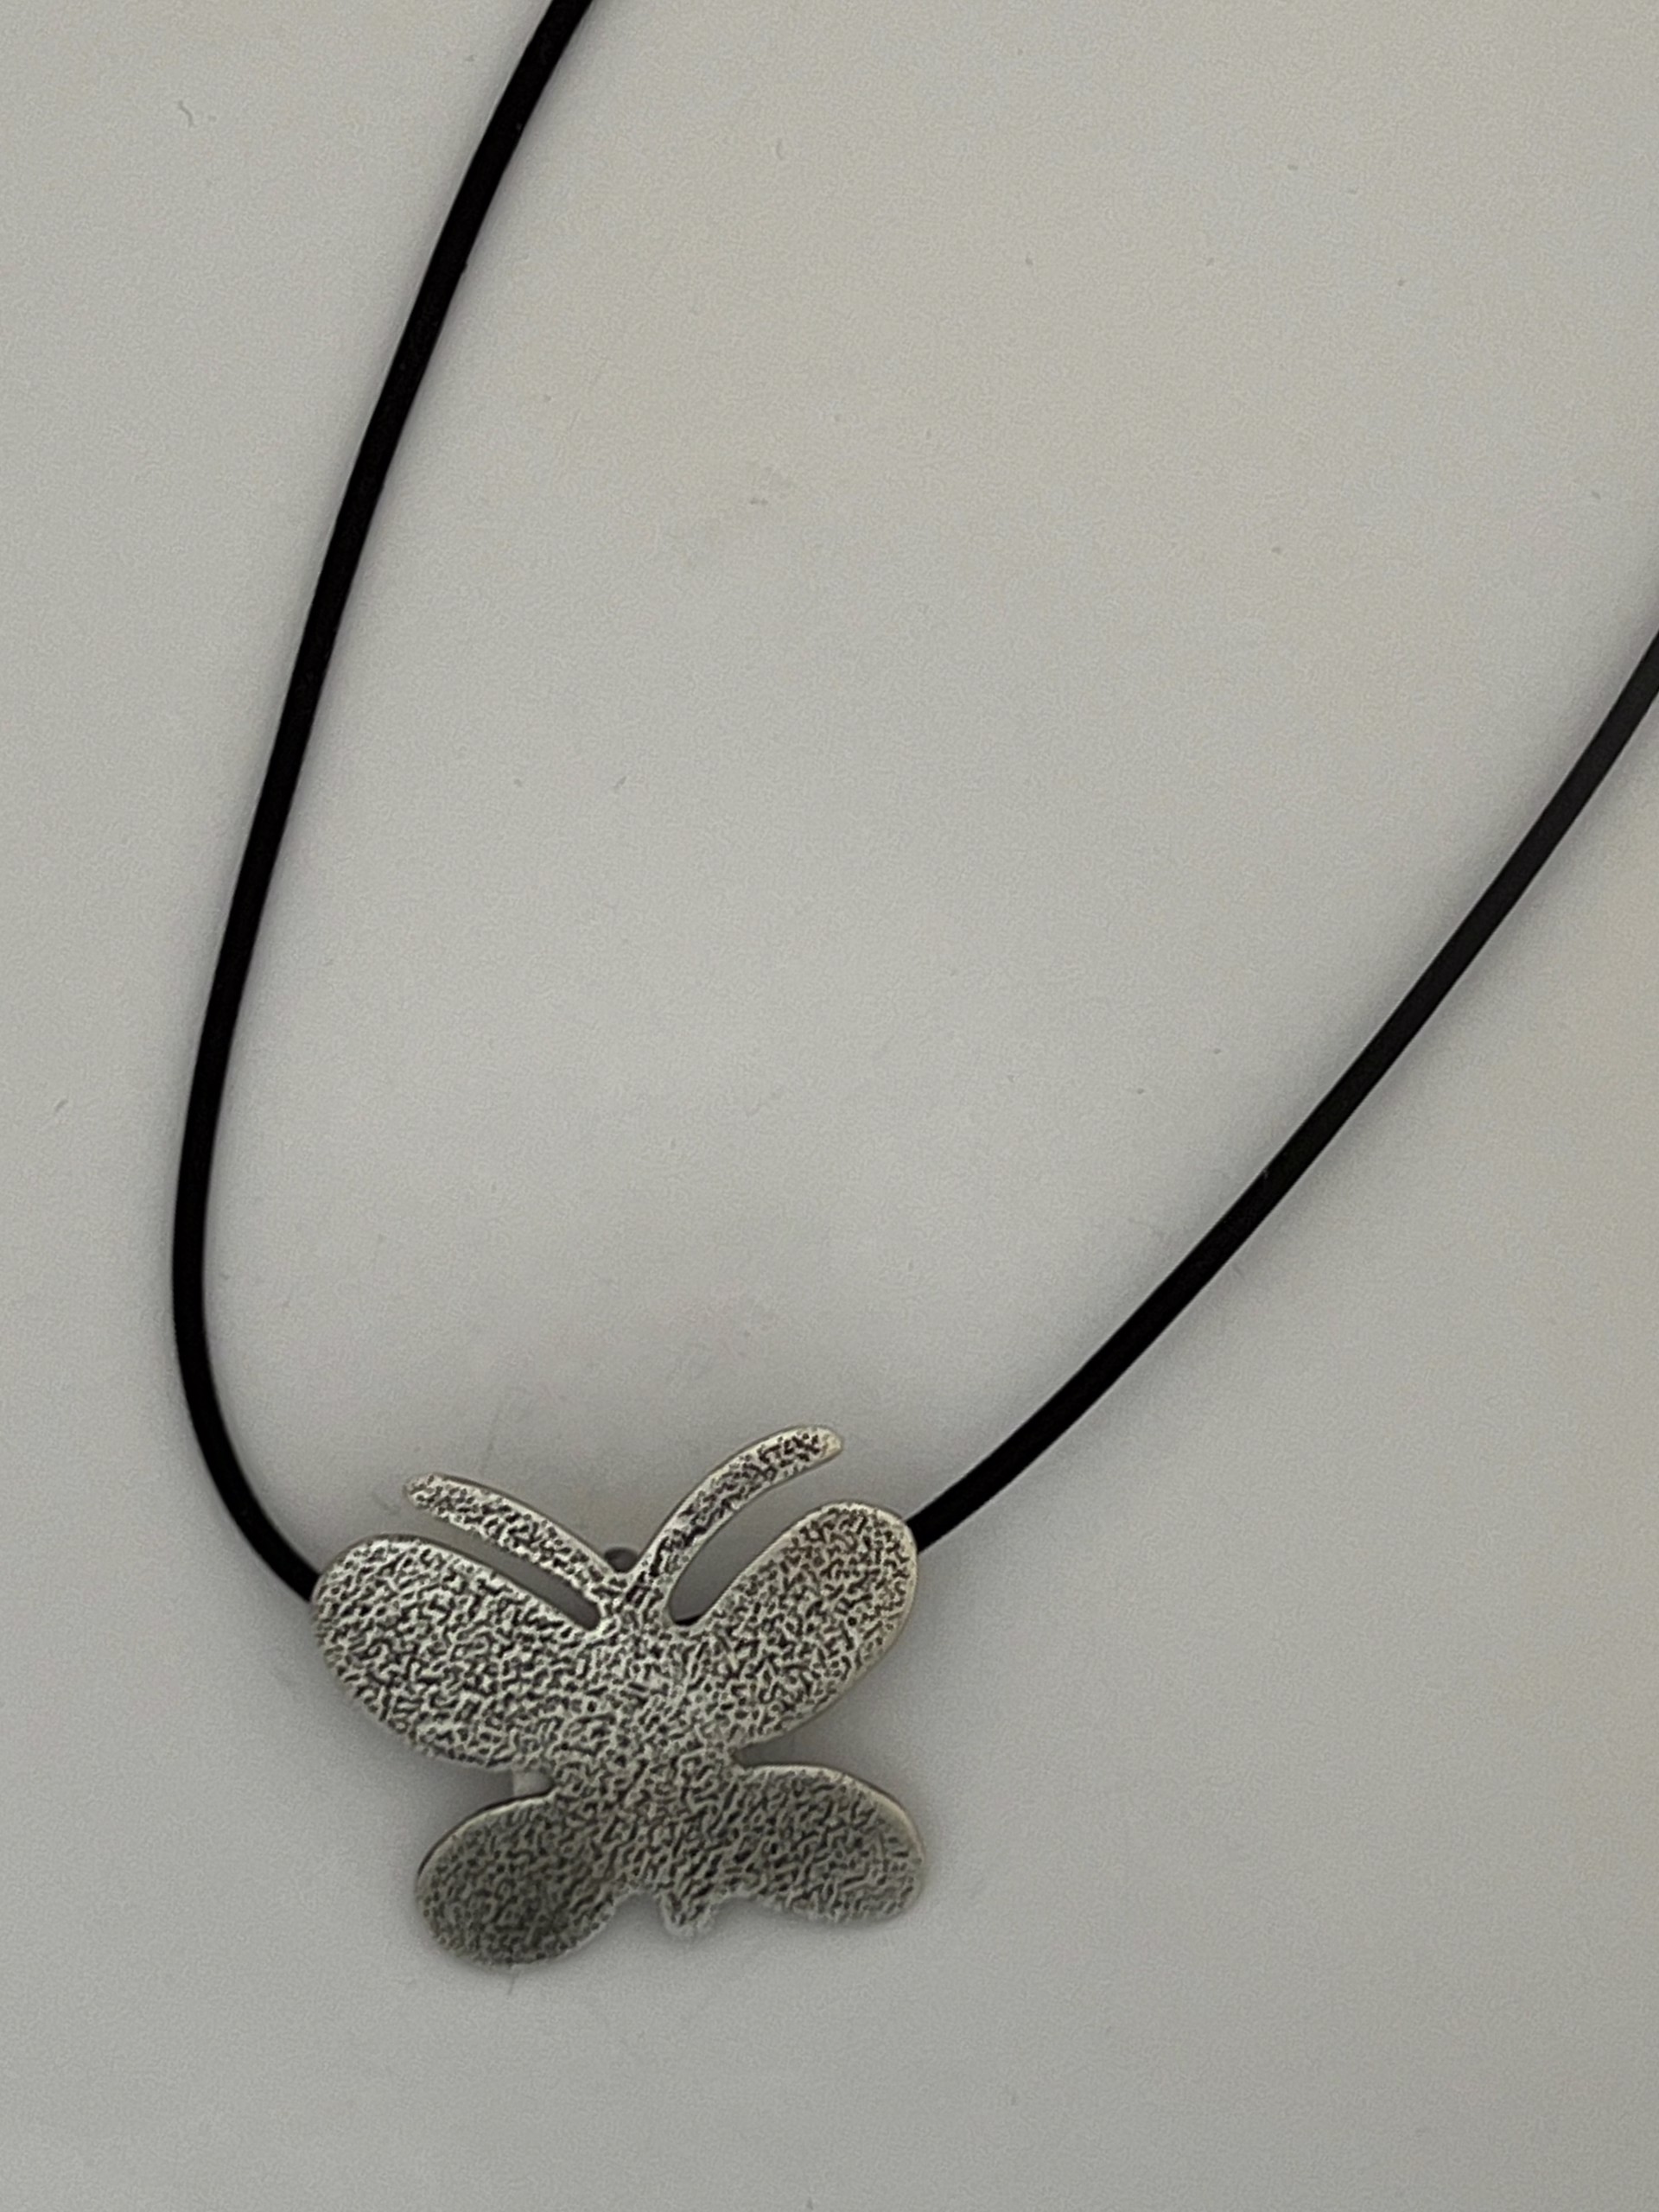 Textured Butterfly pendant by Melanie A. Yazzie